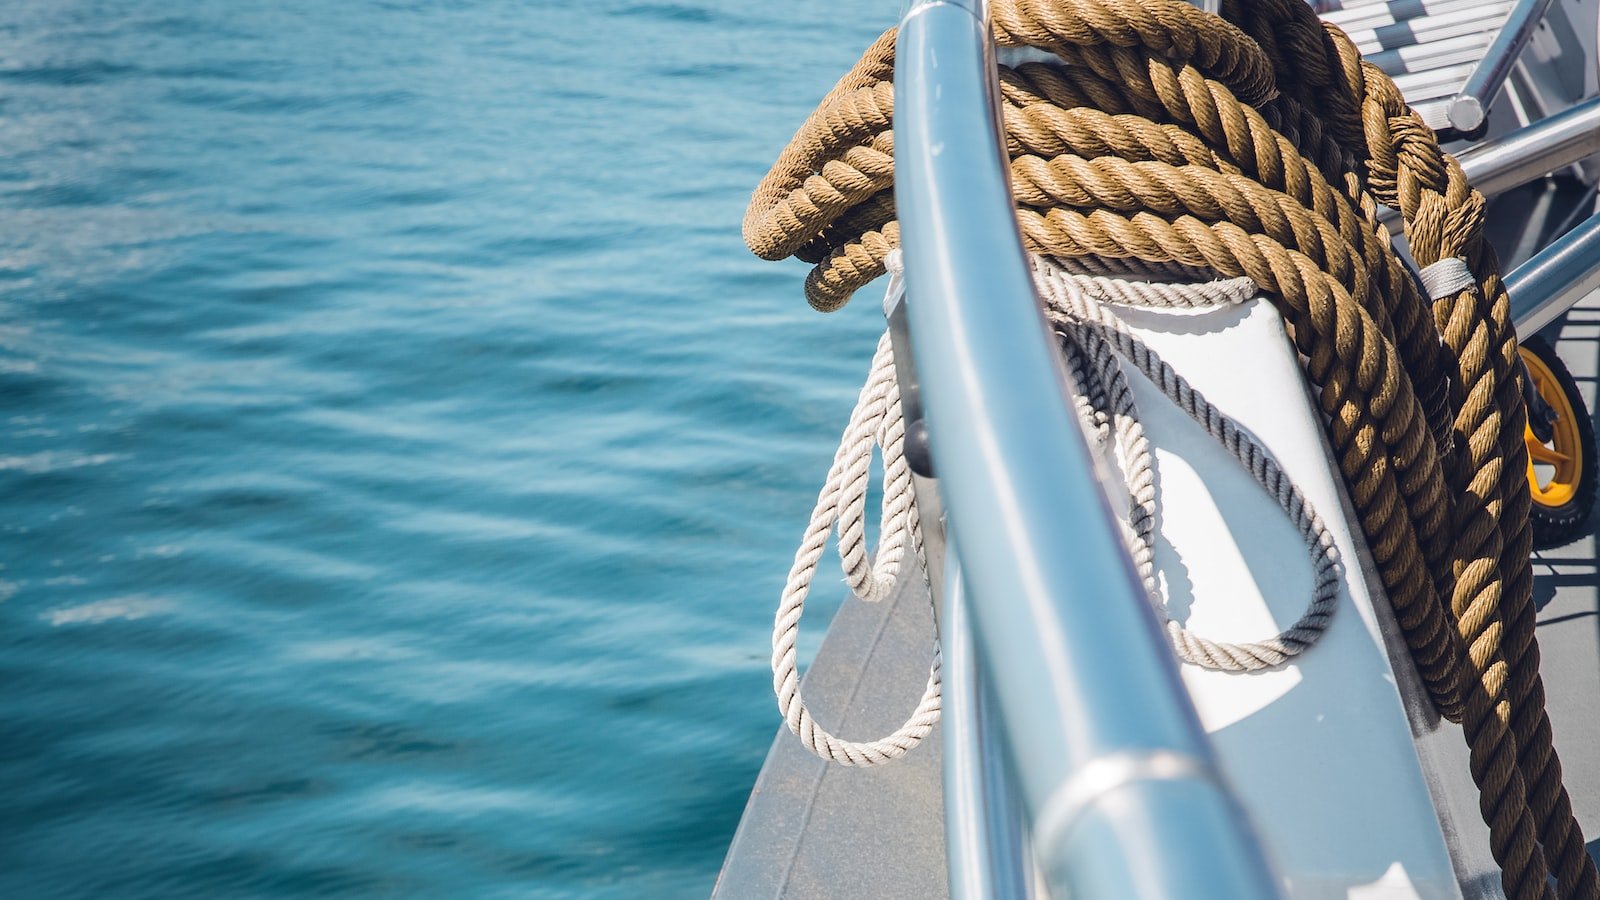 Understanding the Vulnerabilities: Assessing Potential Risks to Your Boat